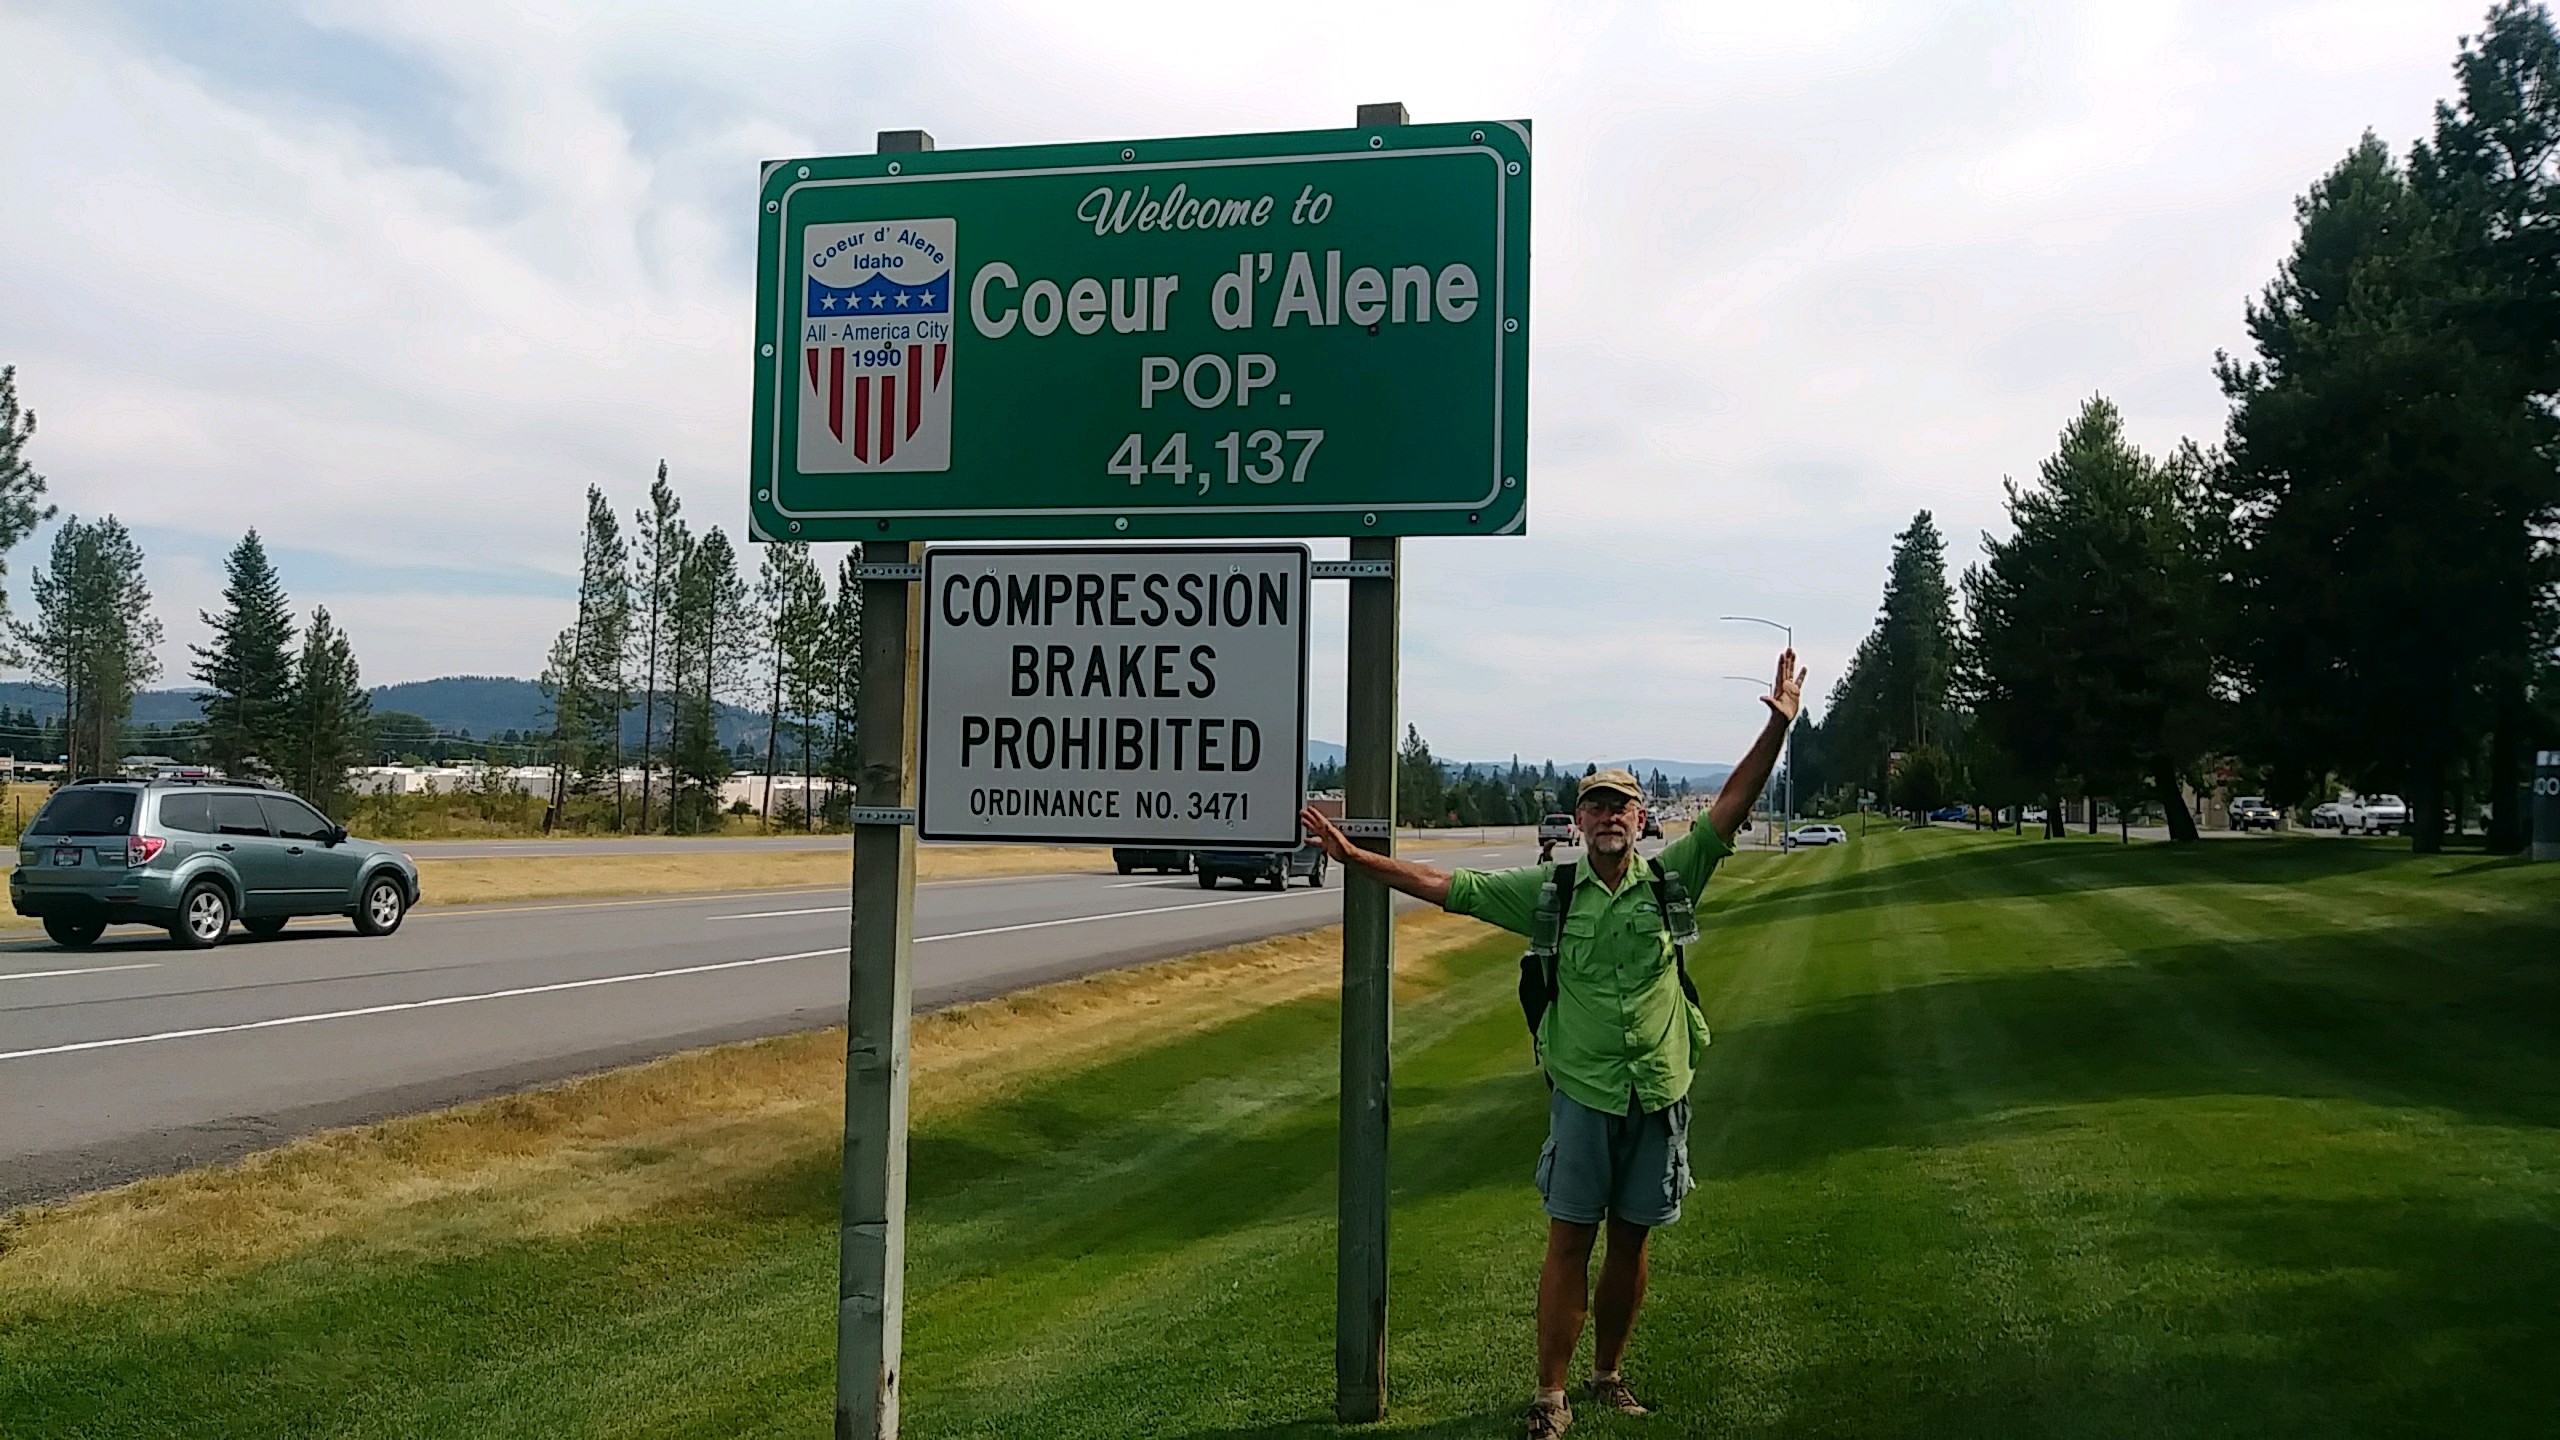 Hitchhiking to Coeur d Alene